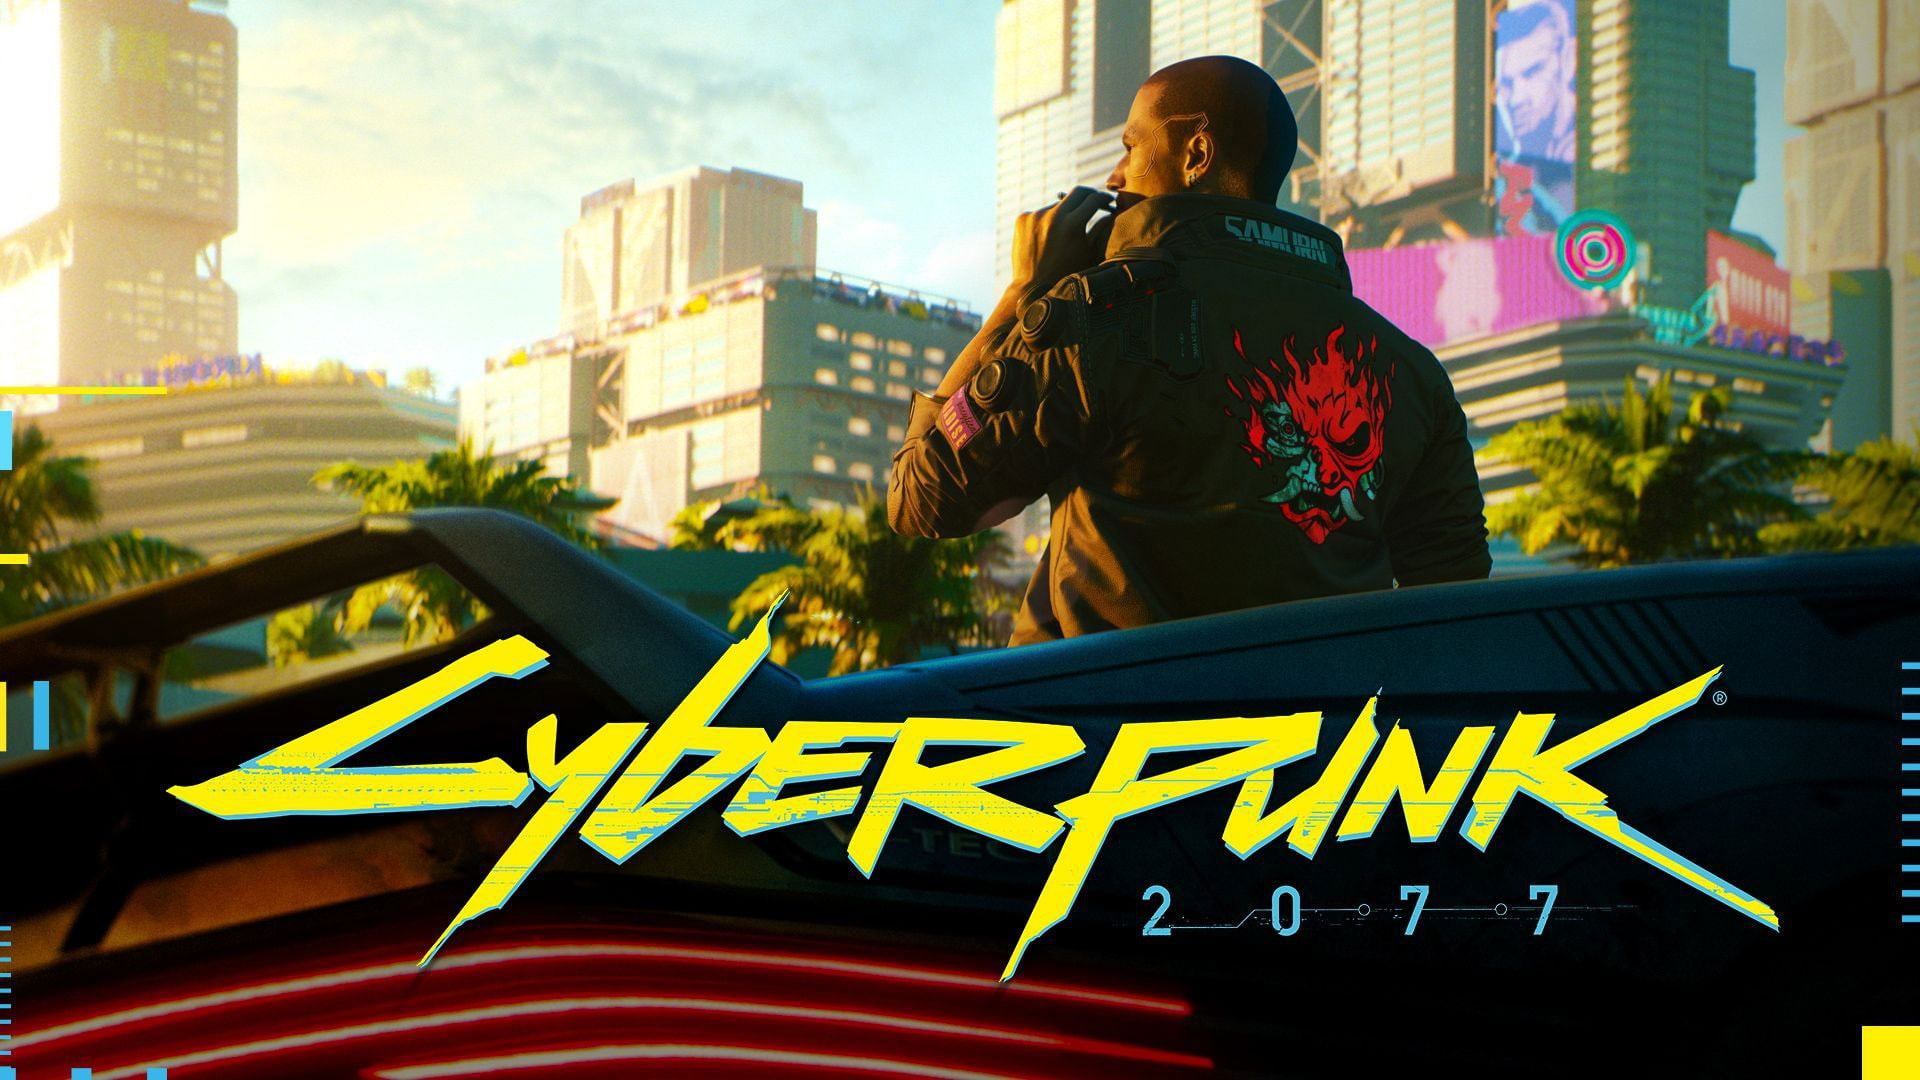 Cyberpunk 2077 wallpaper, The city, The game, CD Projekt RED, Video game